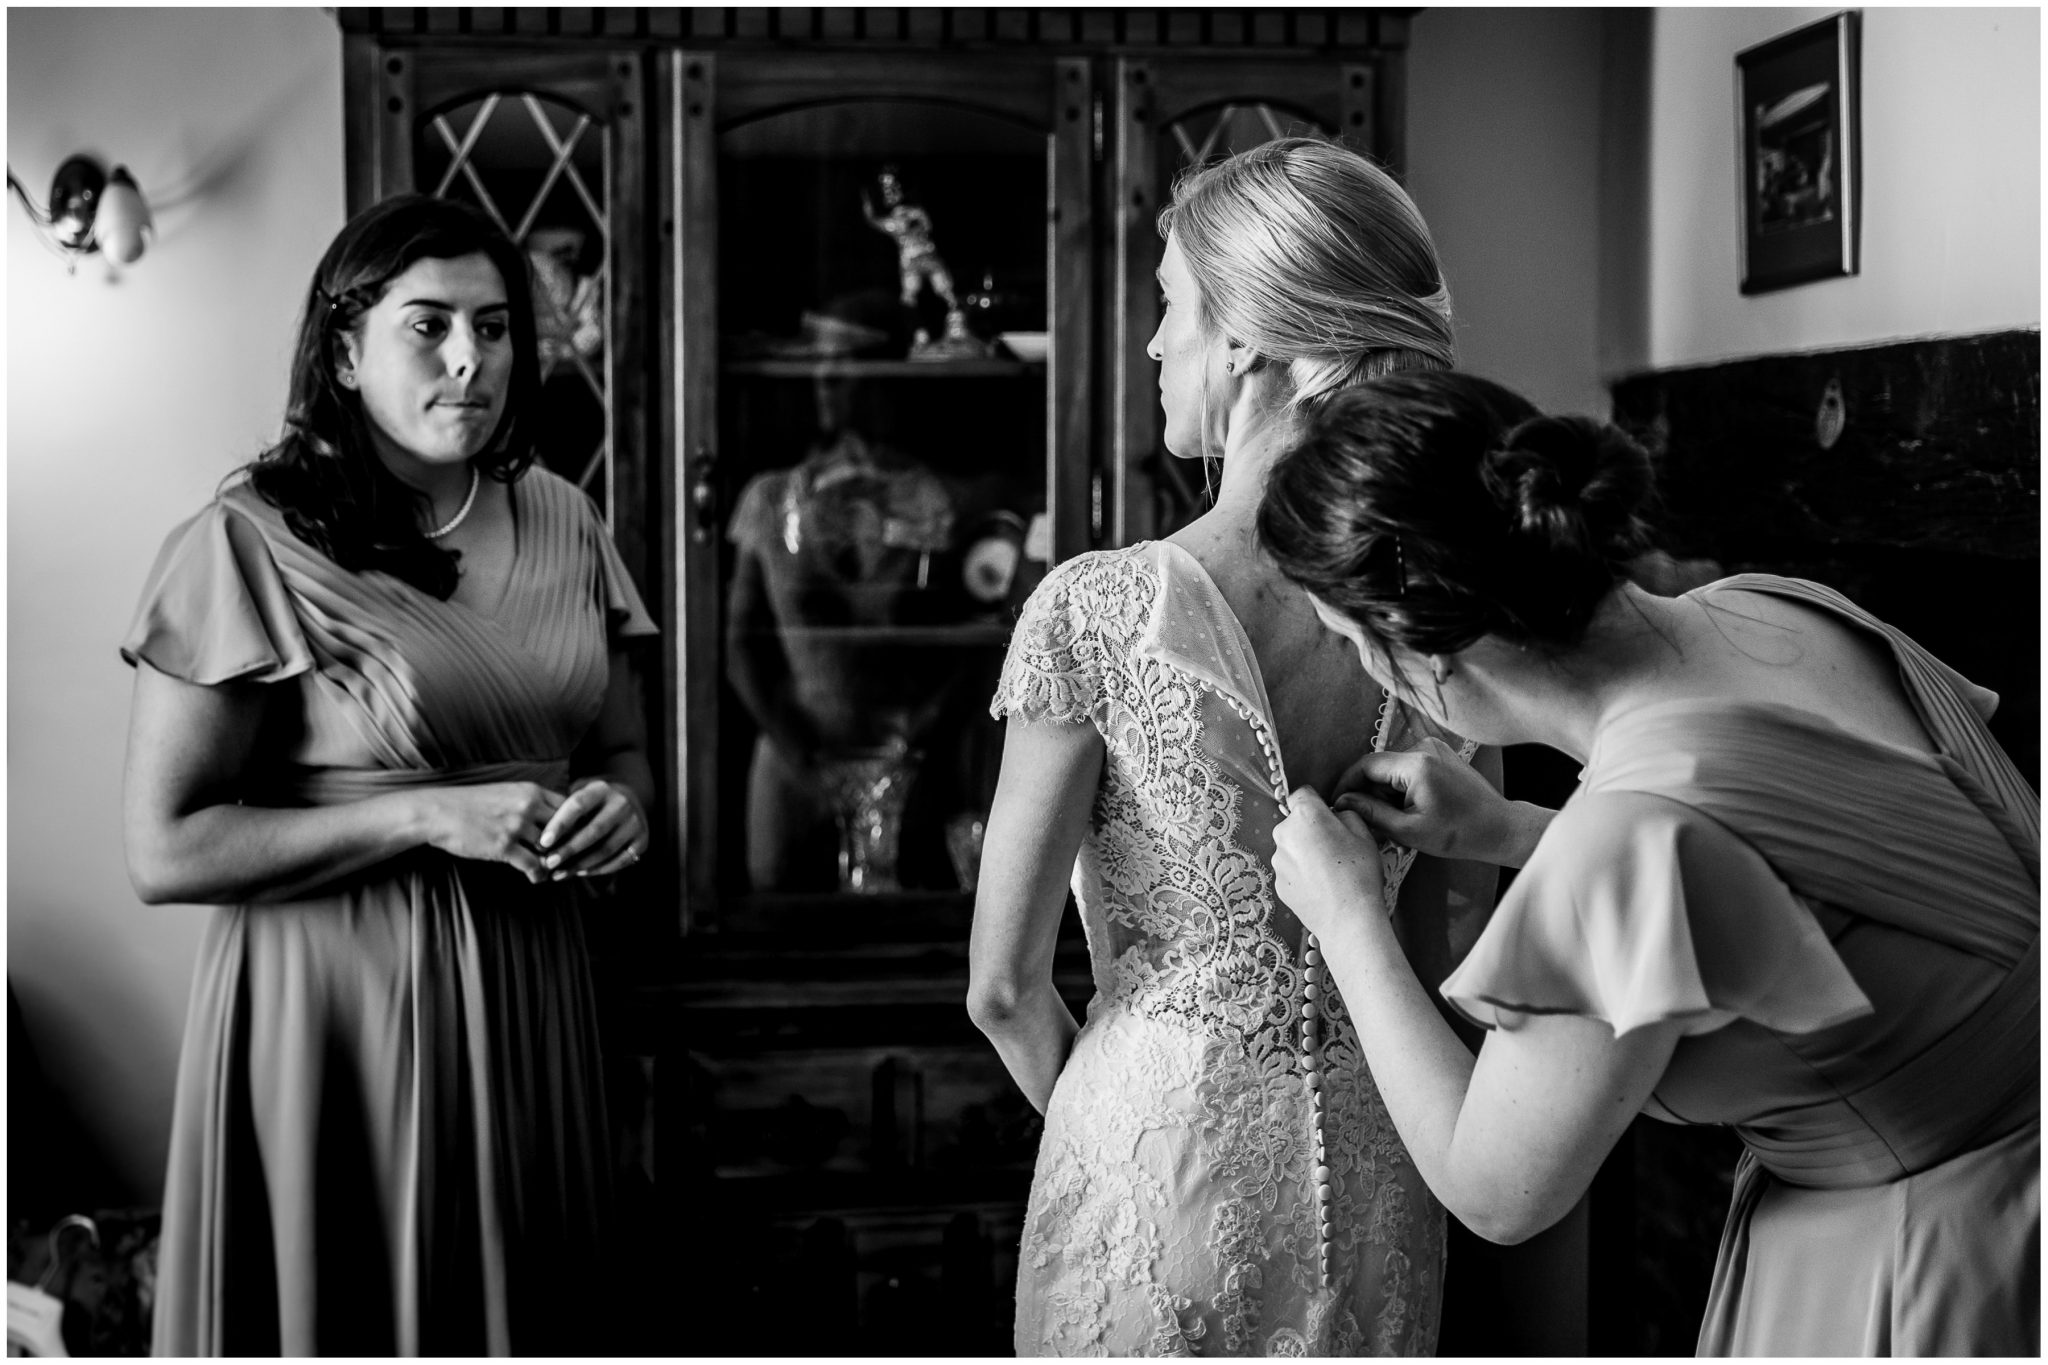 Bridesmaids help the bride into her wedding dress and do up the many buttons